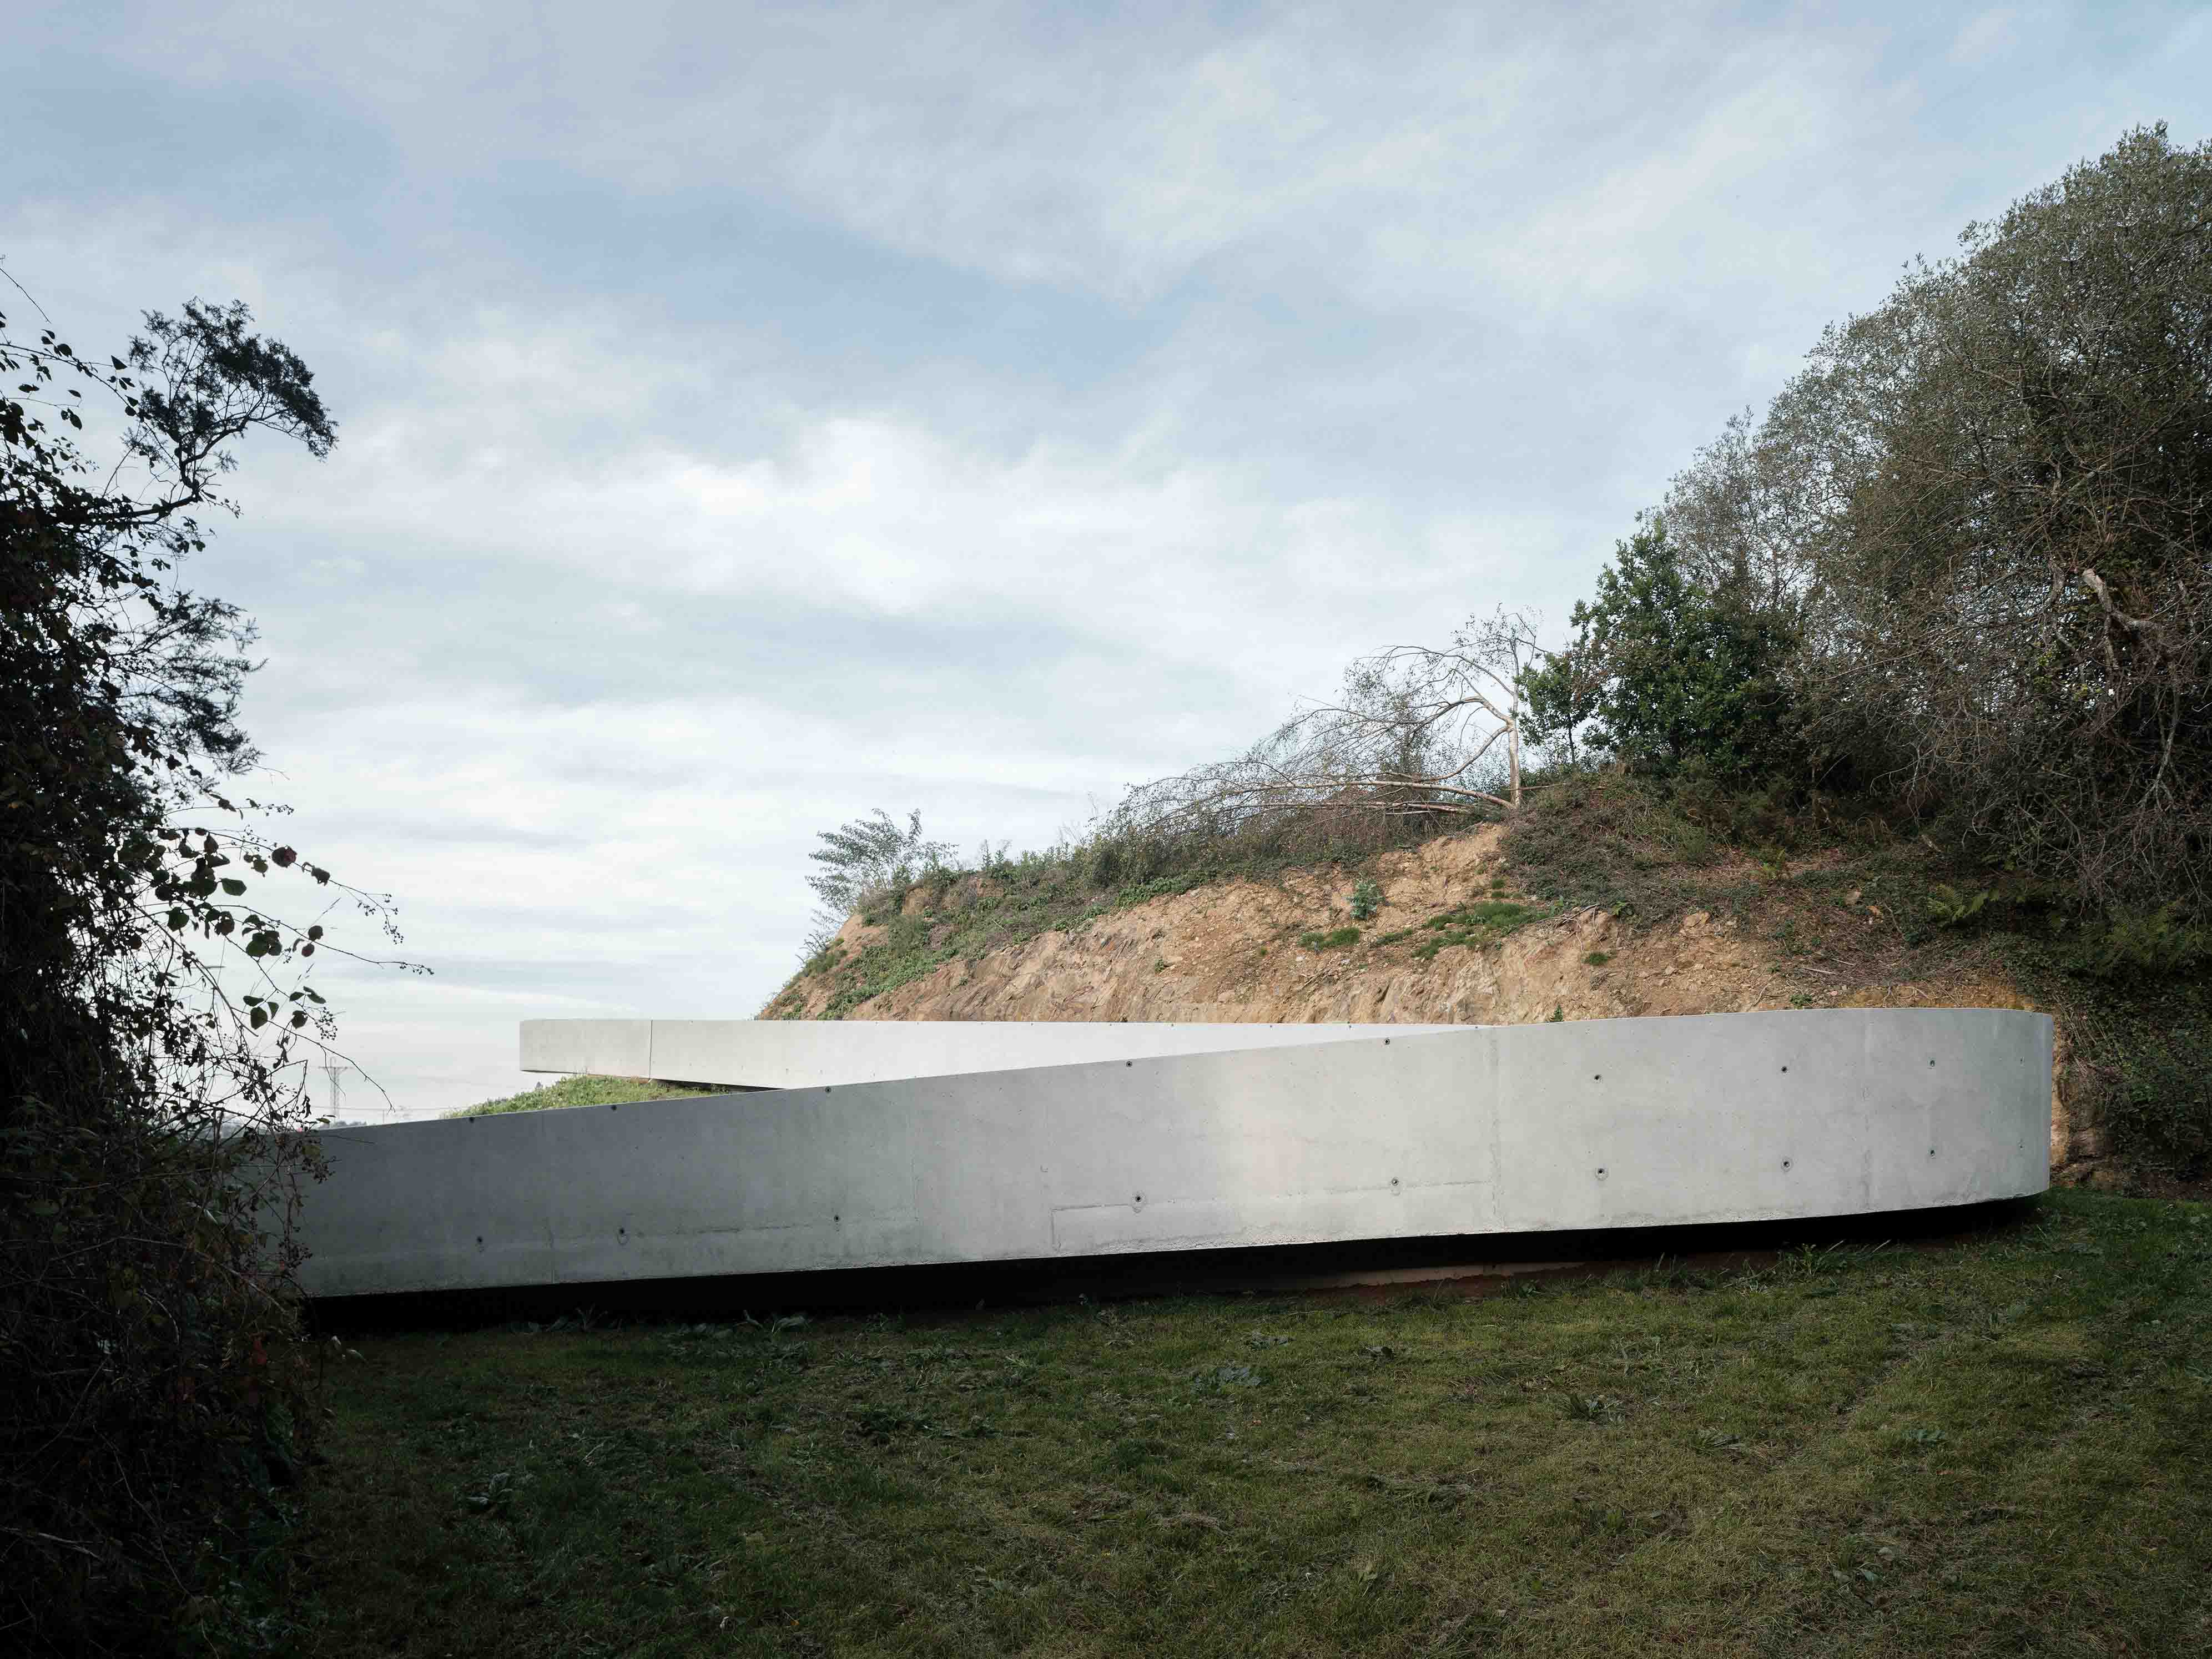 This 111-meter-long precast concrete structure follows the sacred hill of Monte do Gozo